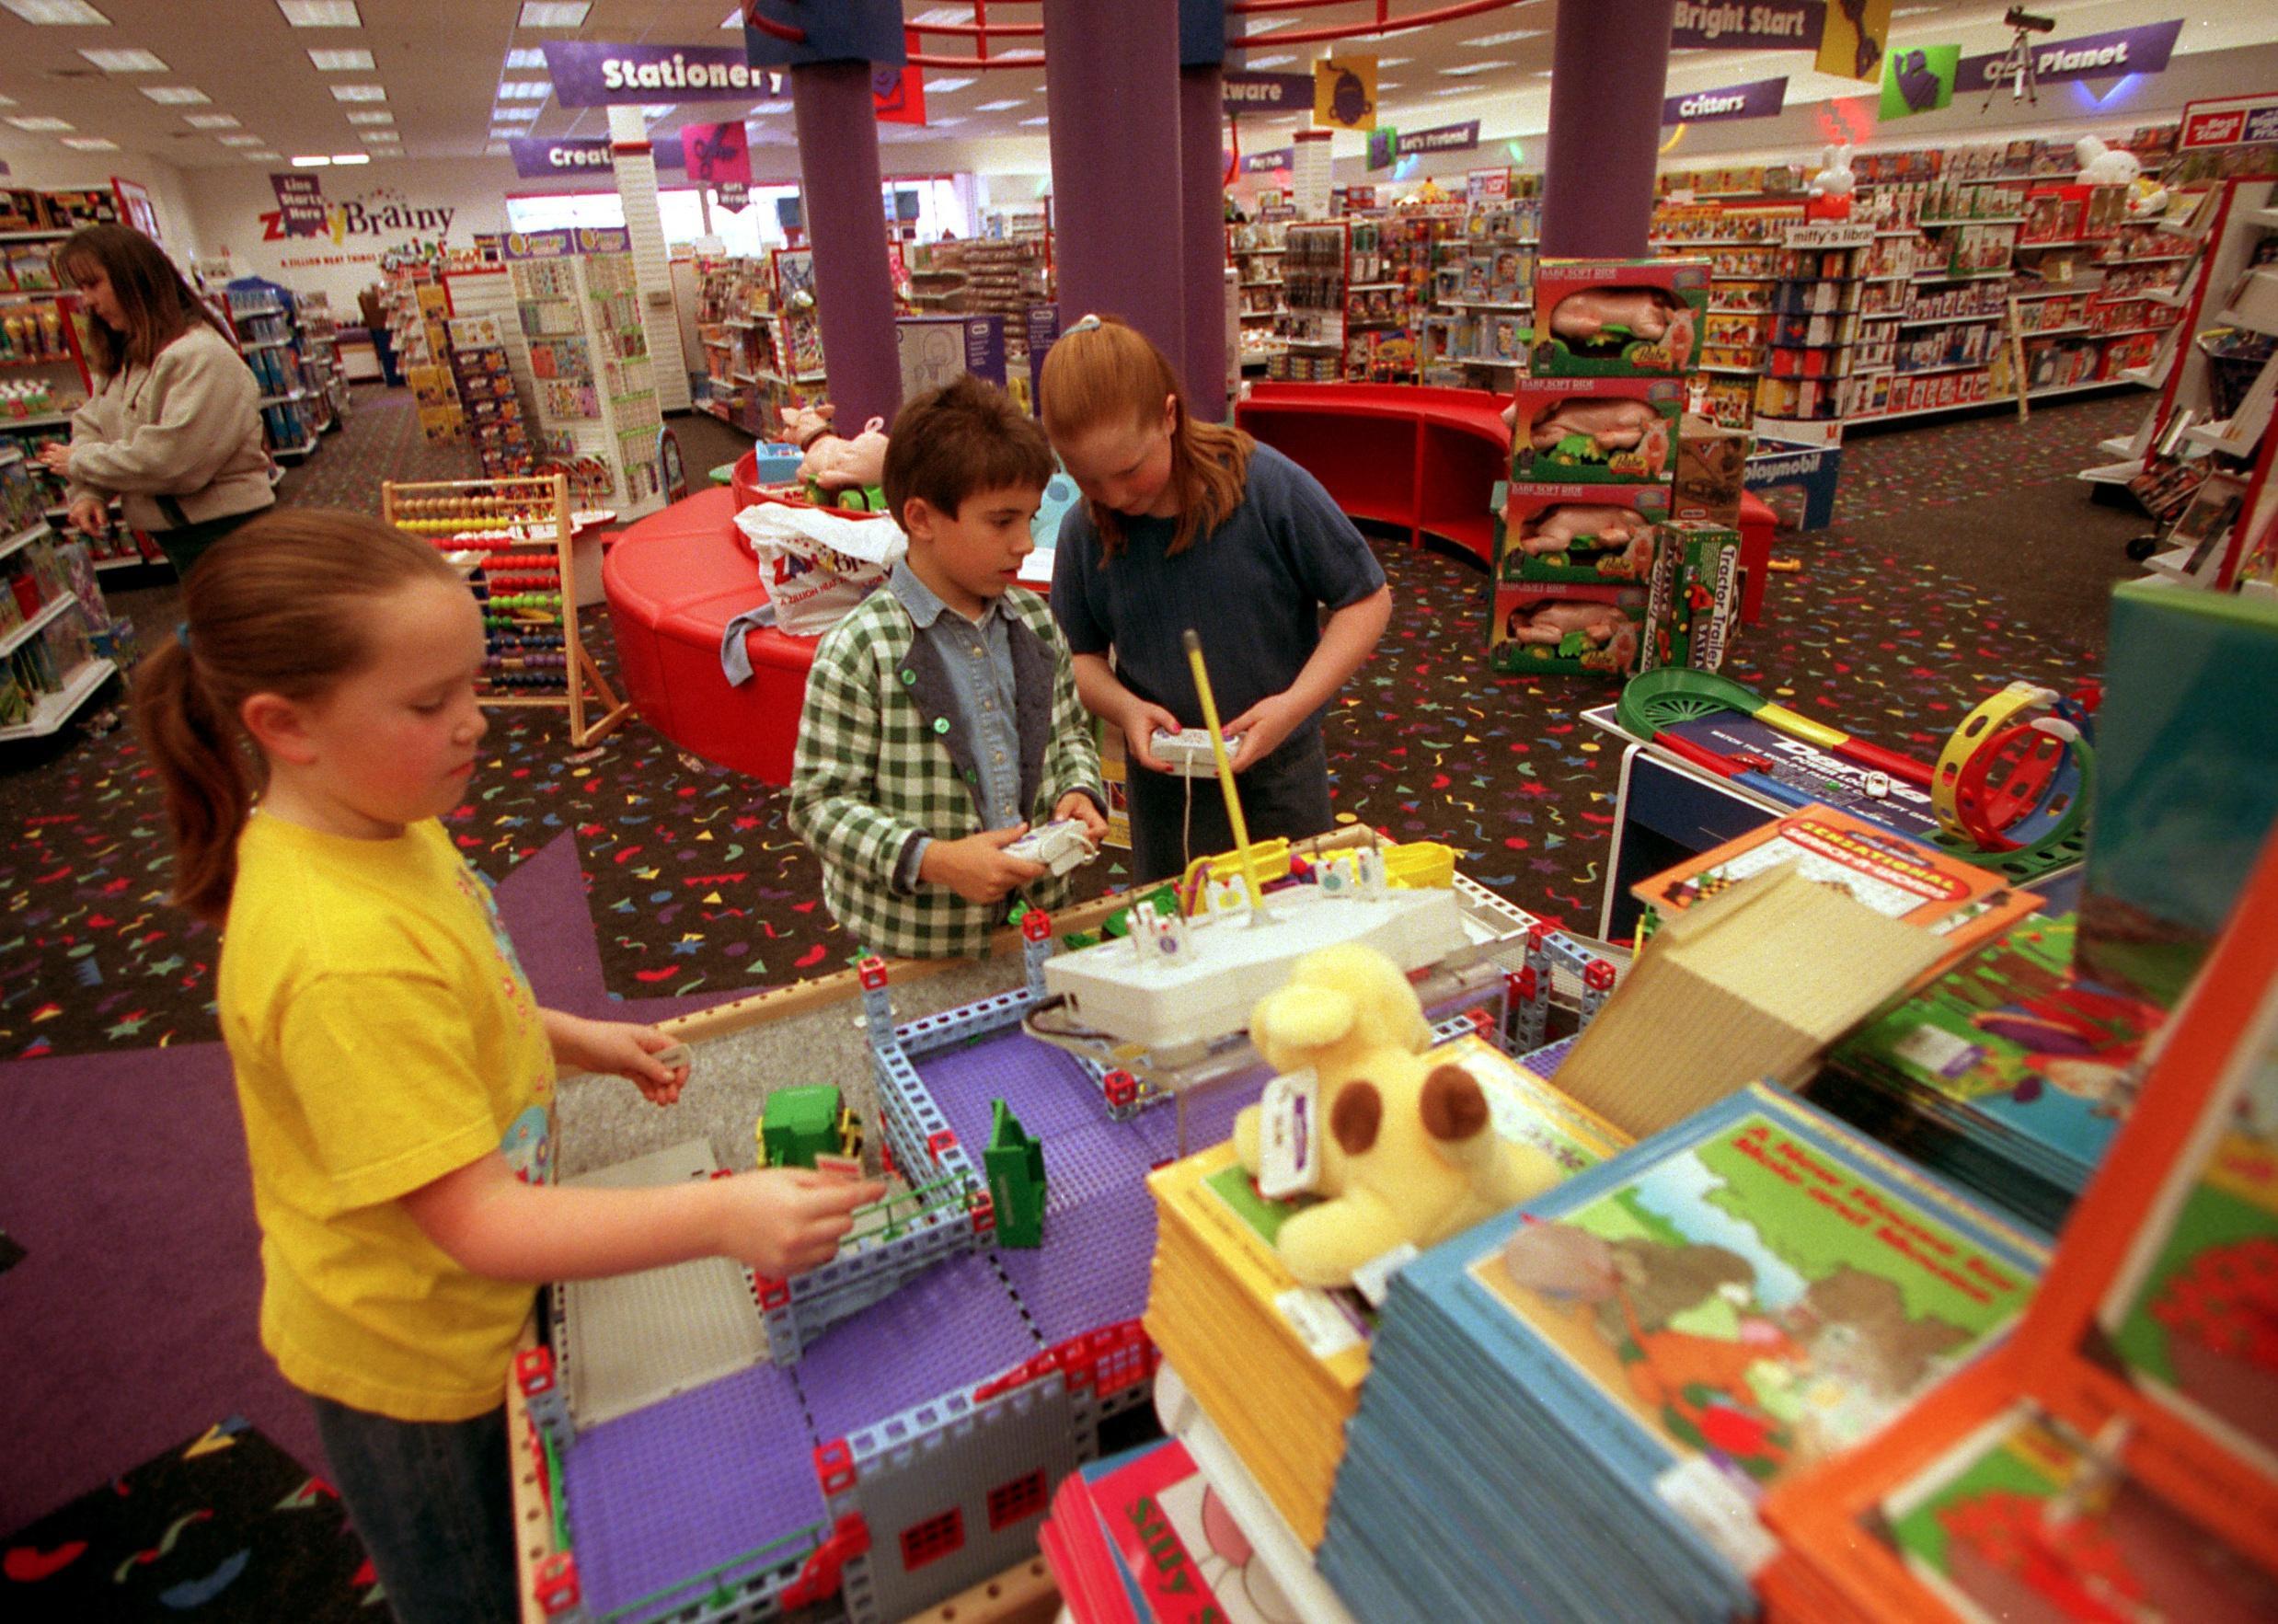 Kids playing at a toy store.